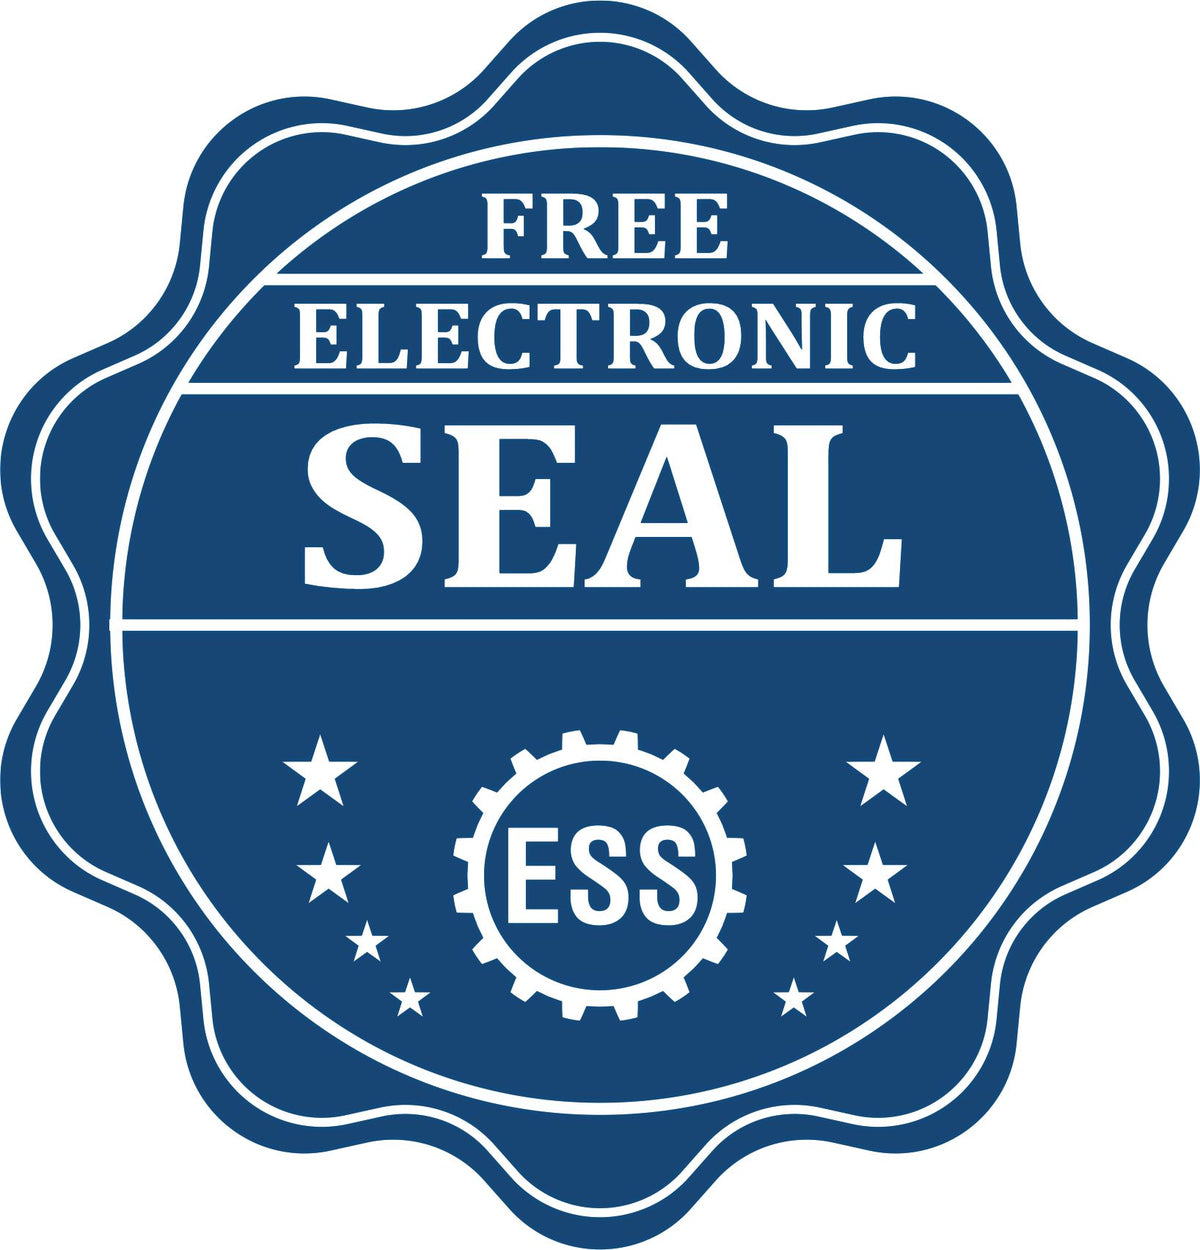 A badge showing a free electronic seal for the Long Reach Nevada Land Surveyor Seal with stars and the ESS gear on the emblem.